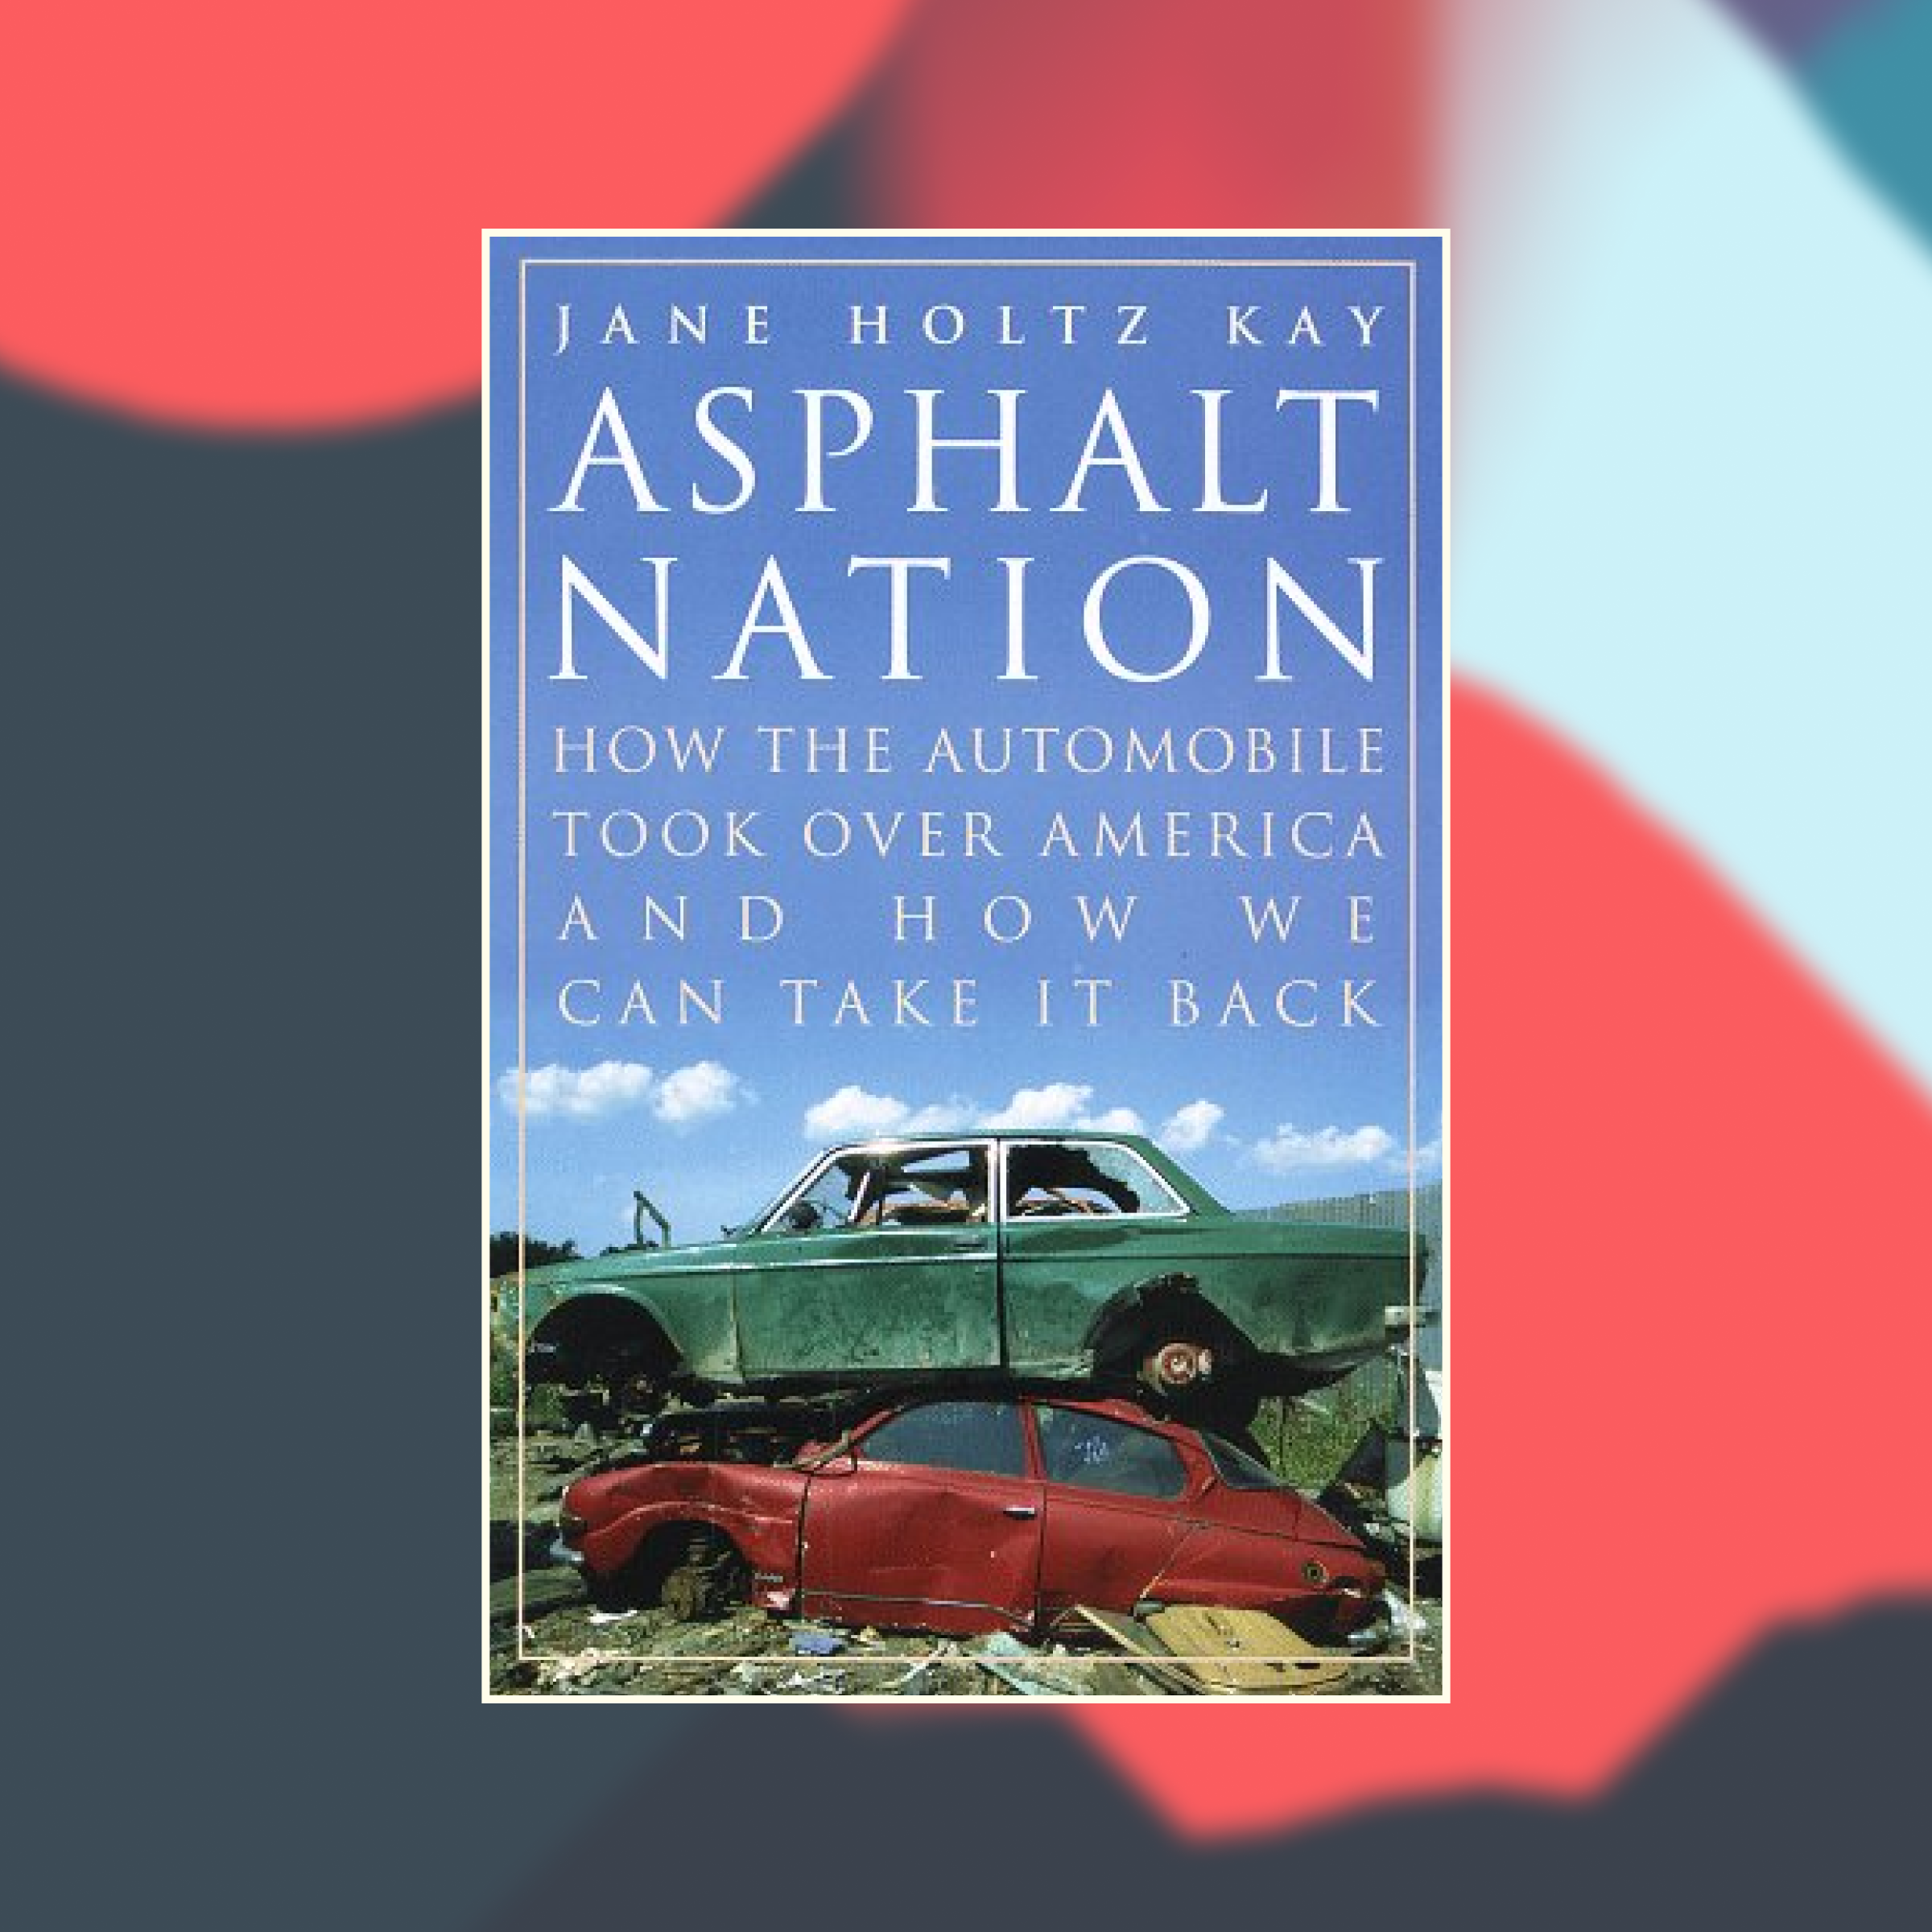 Book cover of Asphalt Nation against an abstract painted background